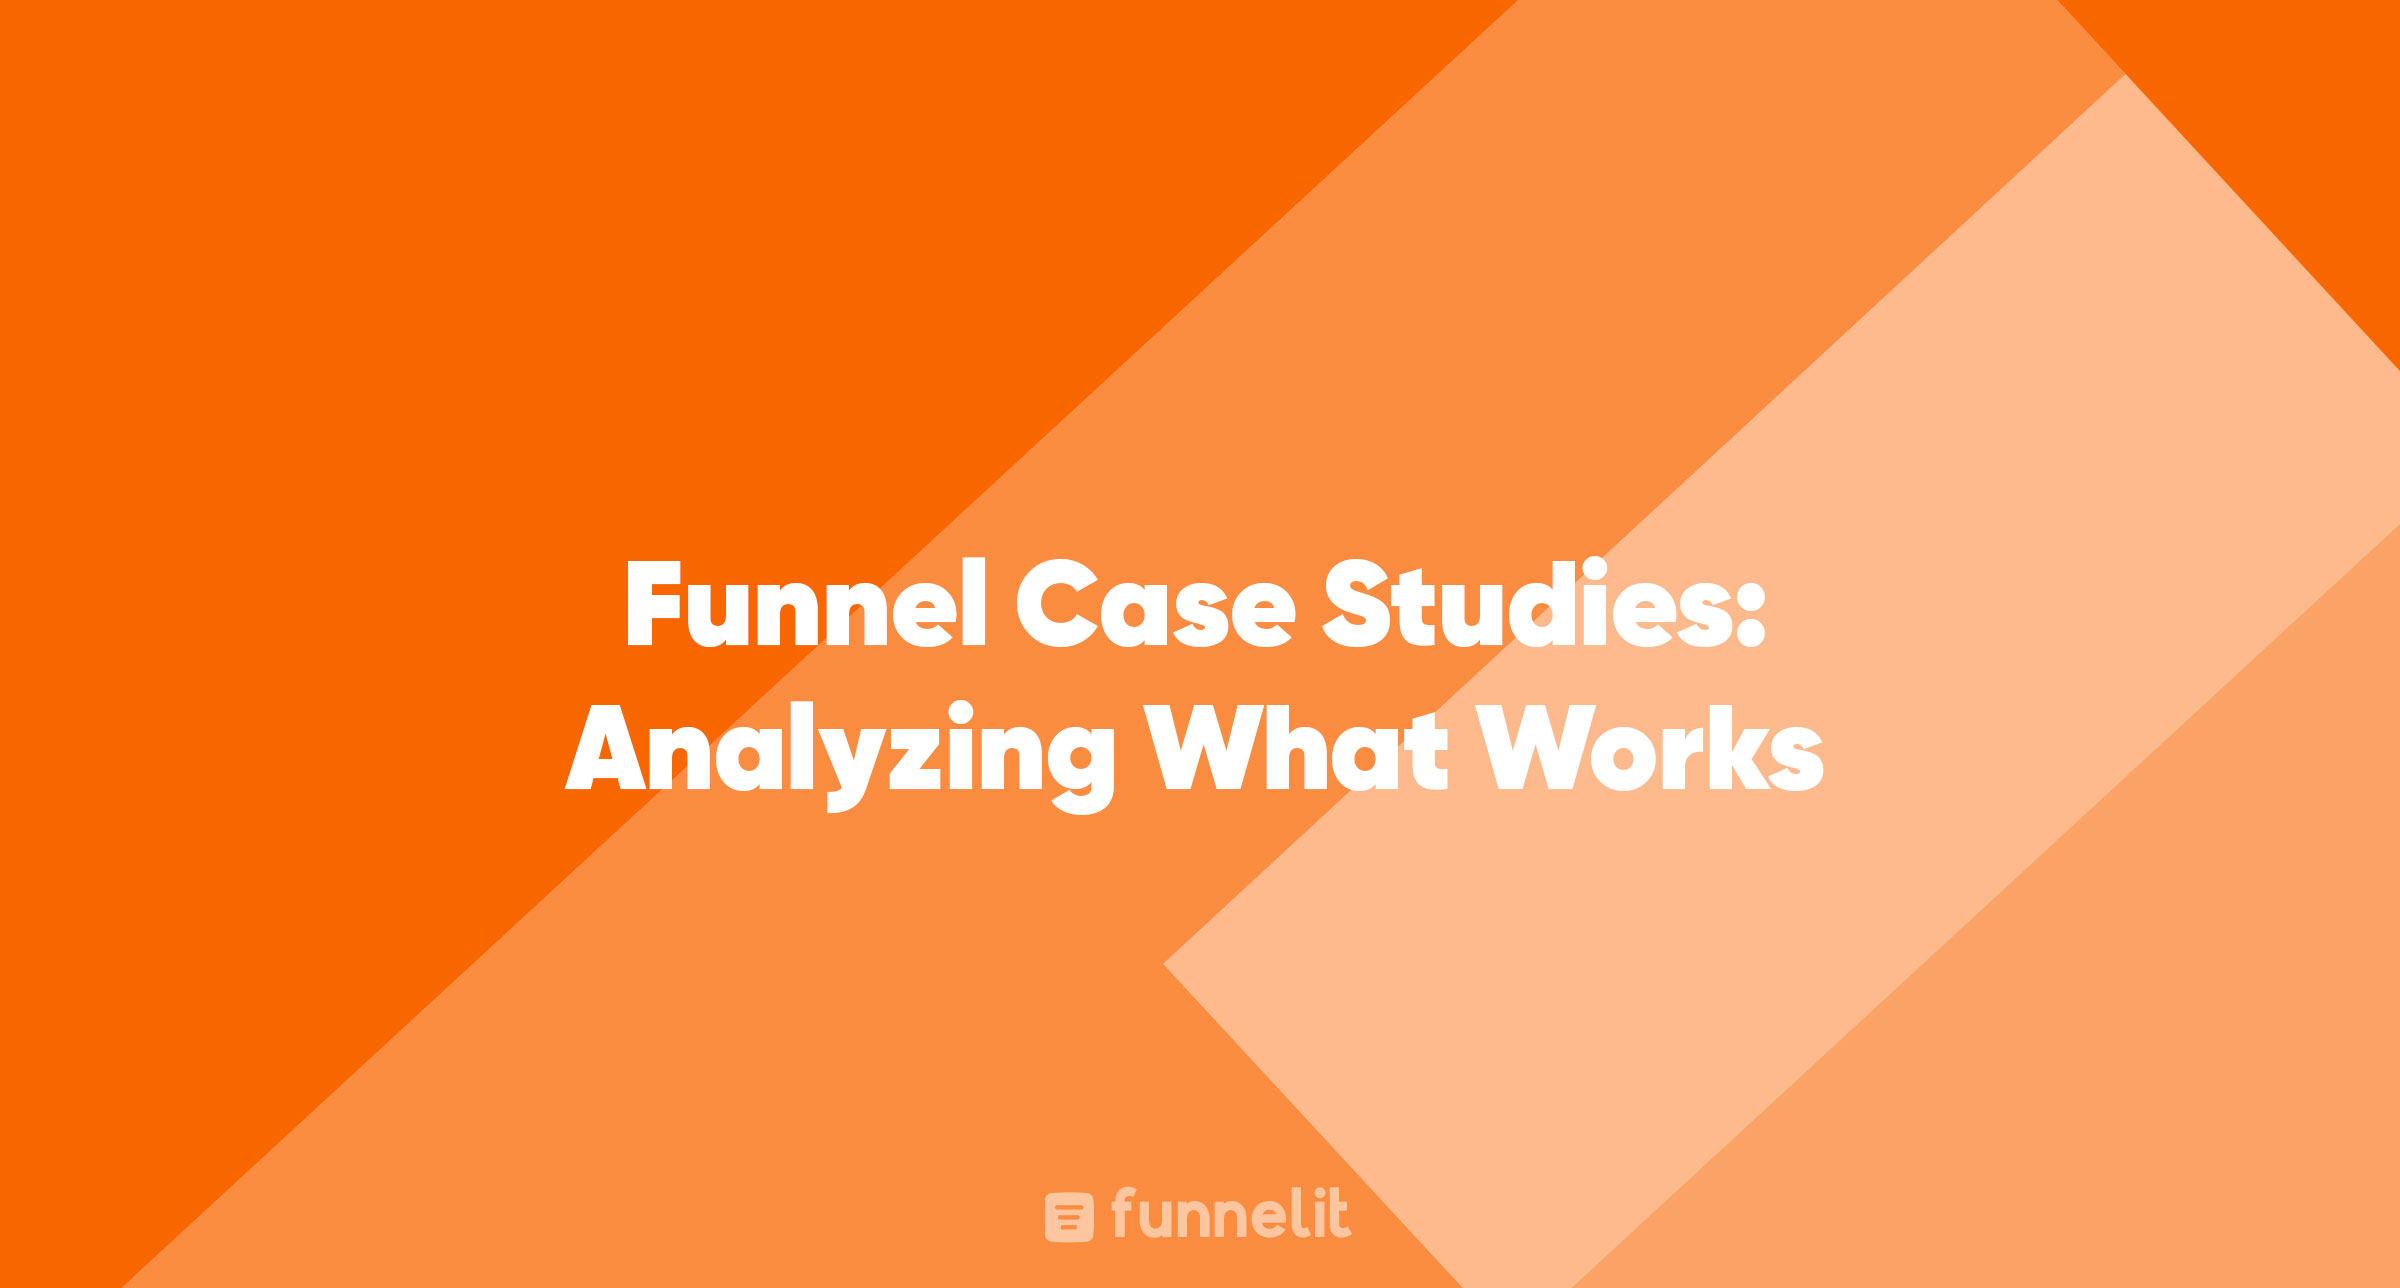 Article | Funnel Case Studies: Analyzing What Works